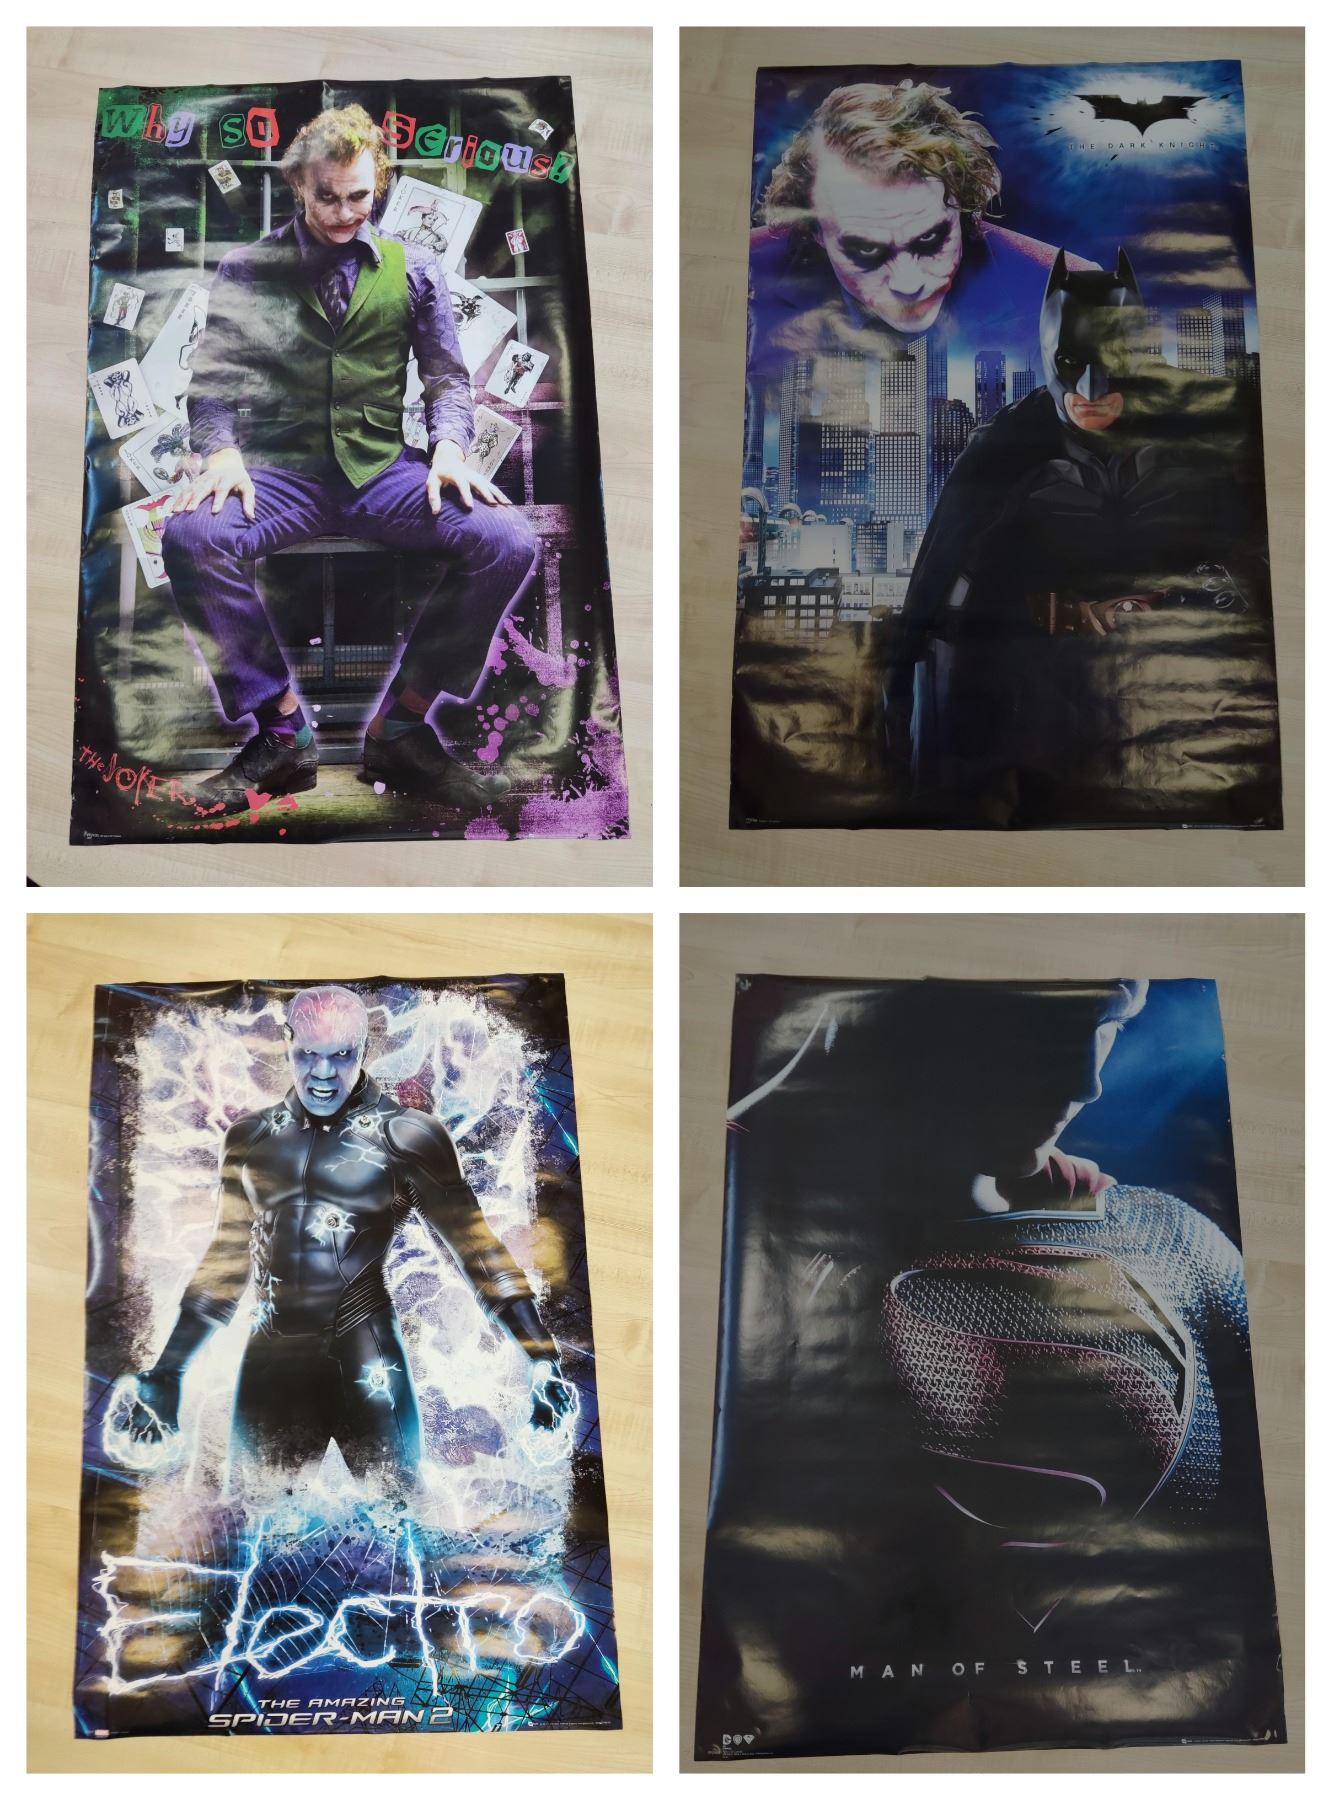 Collection of DC and Marvel posters.